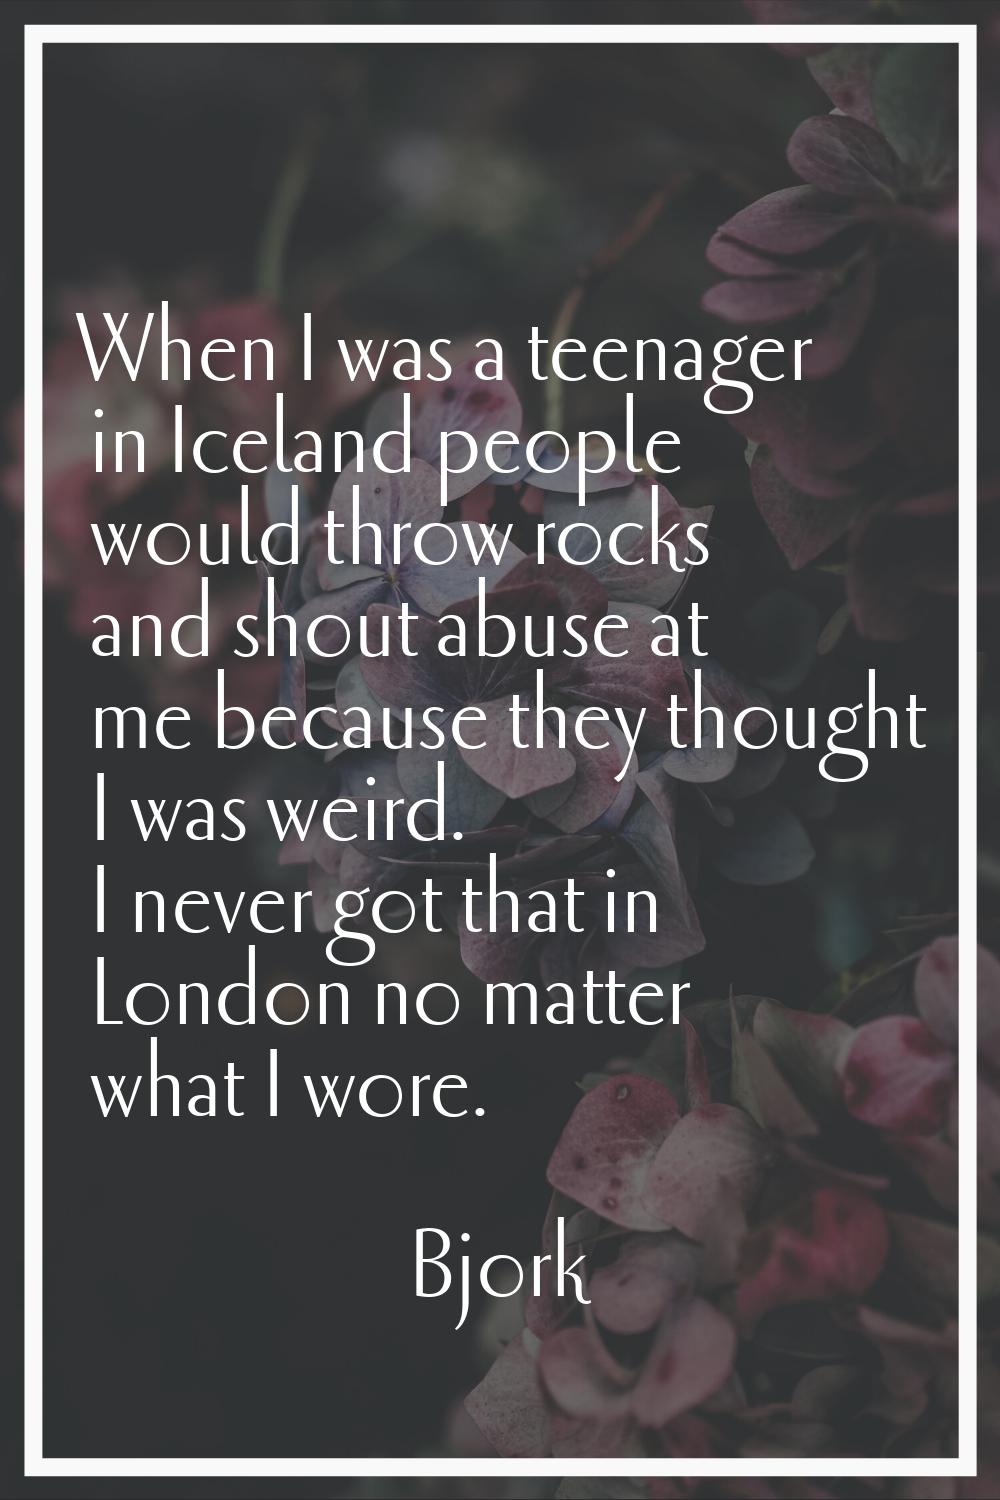 When I was a teenager in Iceland people would throw rocks and shout abuse at me because they though